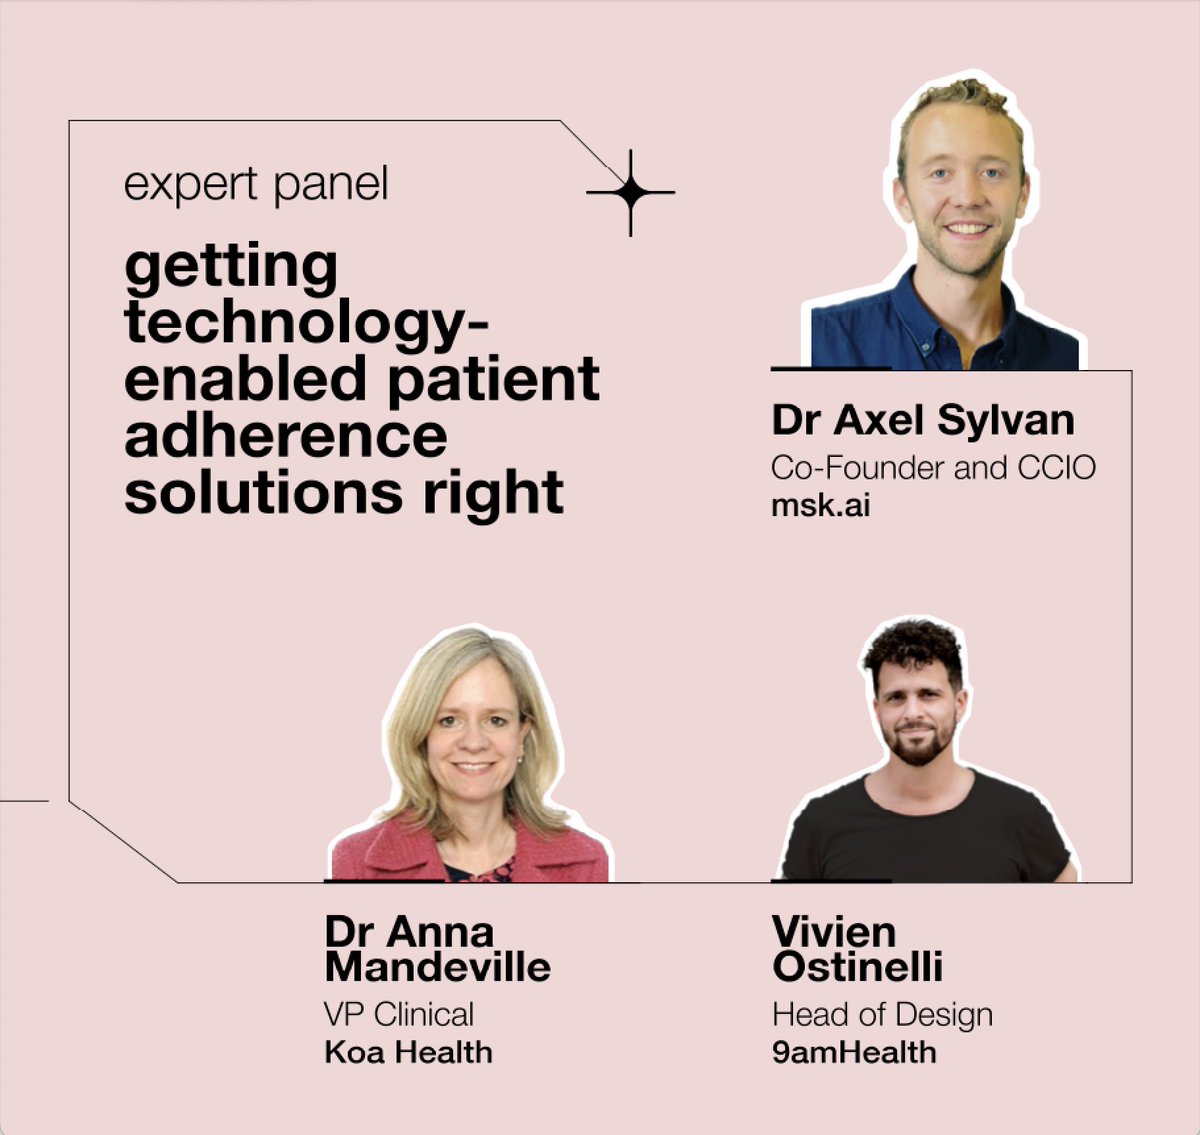 Enjoyed joining a fantastic panel of experts from @9am_health, @umcg & @KoaHealth yesterday! We discussed: ✅ Boosting adherence via digital channels ✅ Driving positive patient behaviour change Big thanks to Supercharge for organising such a stellar event! 🌟 #digitalhealth